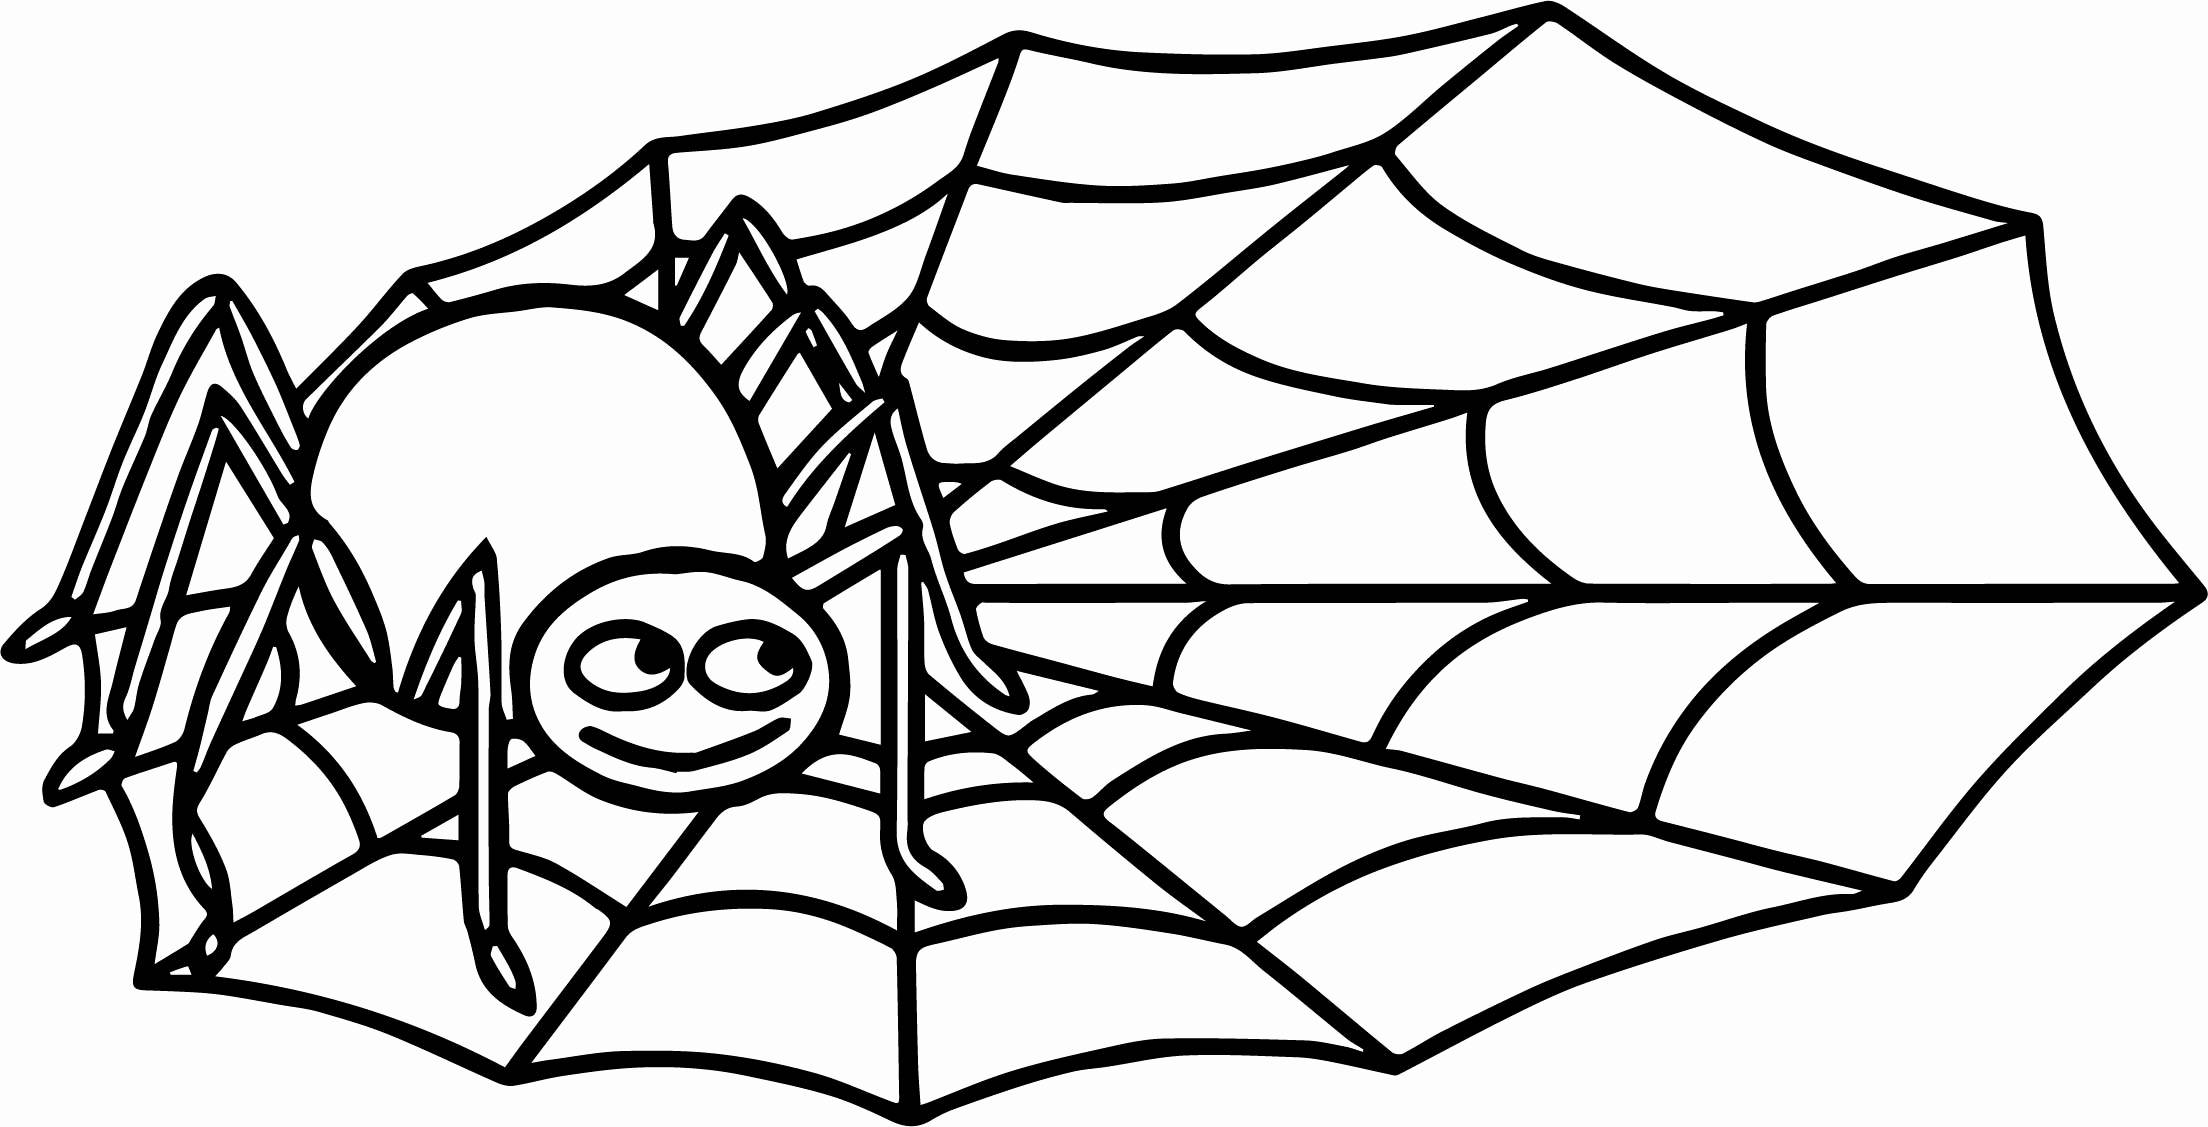 Minecraft Spider Coloring Pages at GetDrawings | Free download